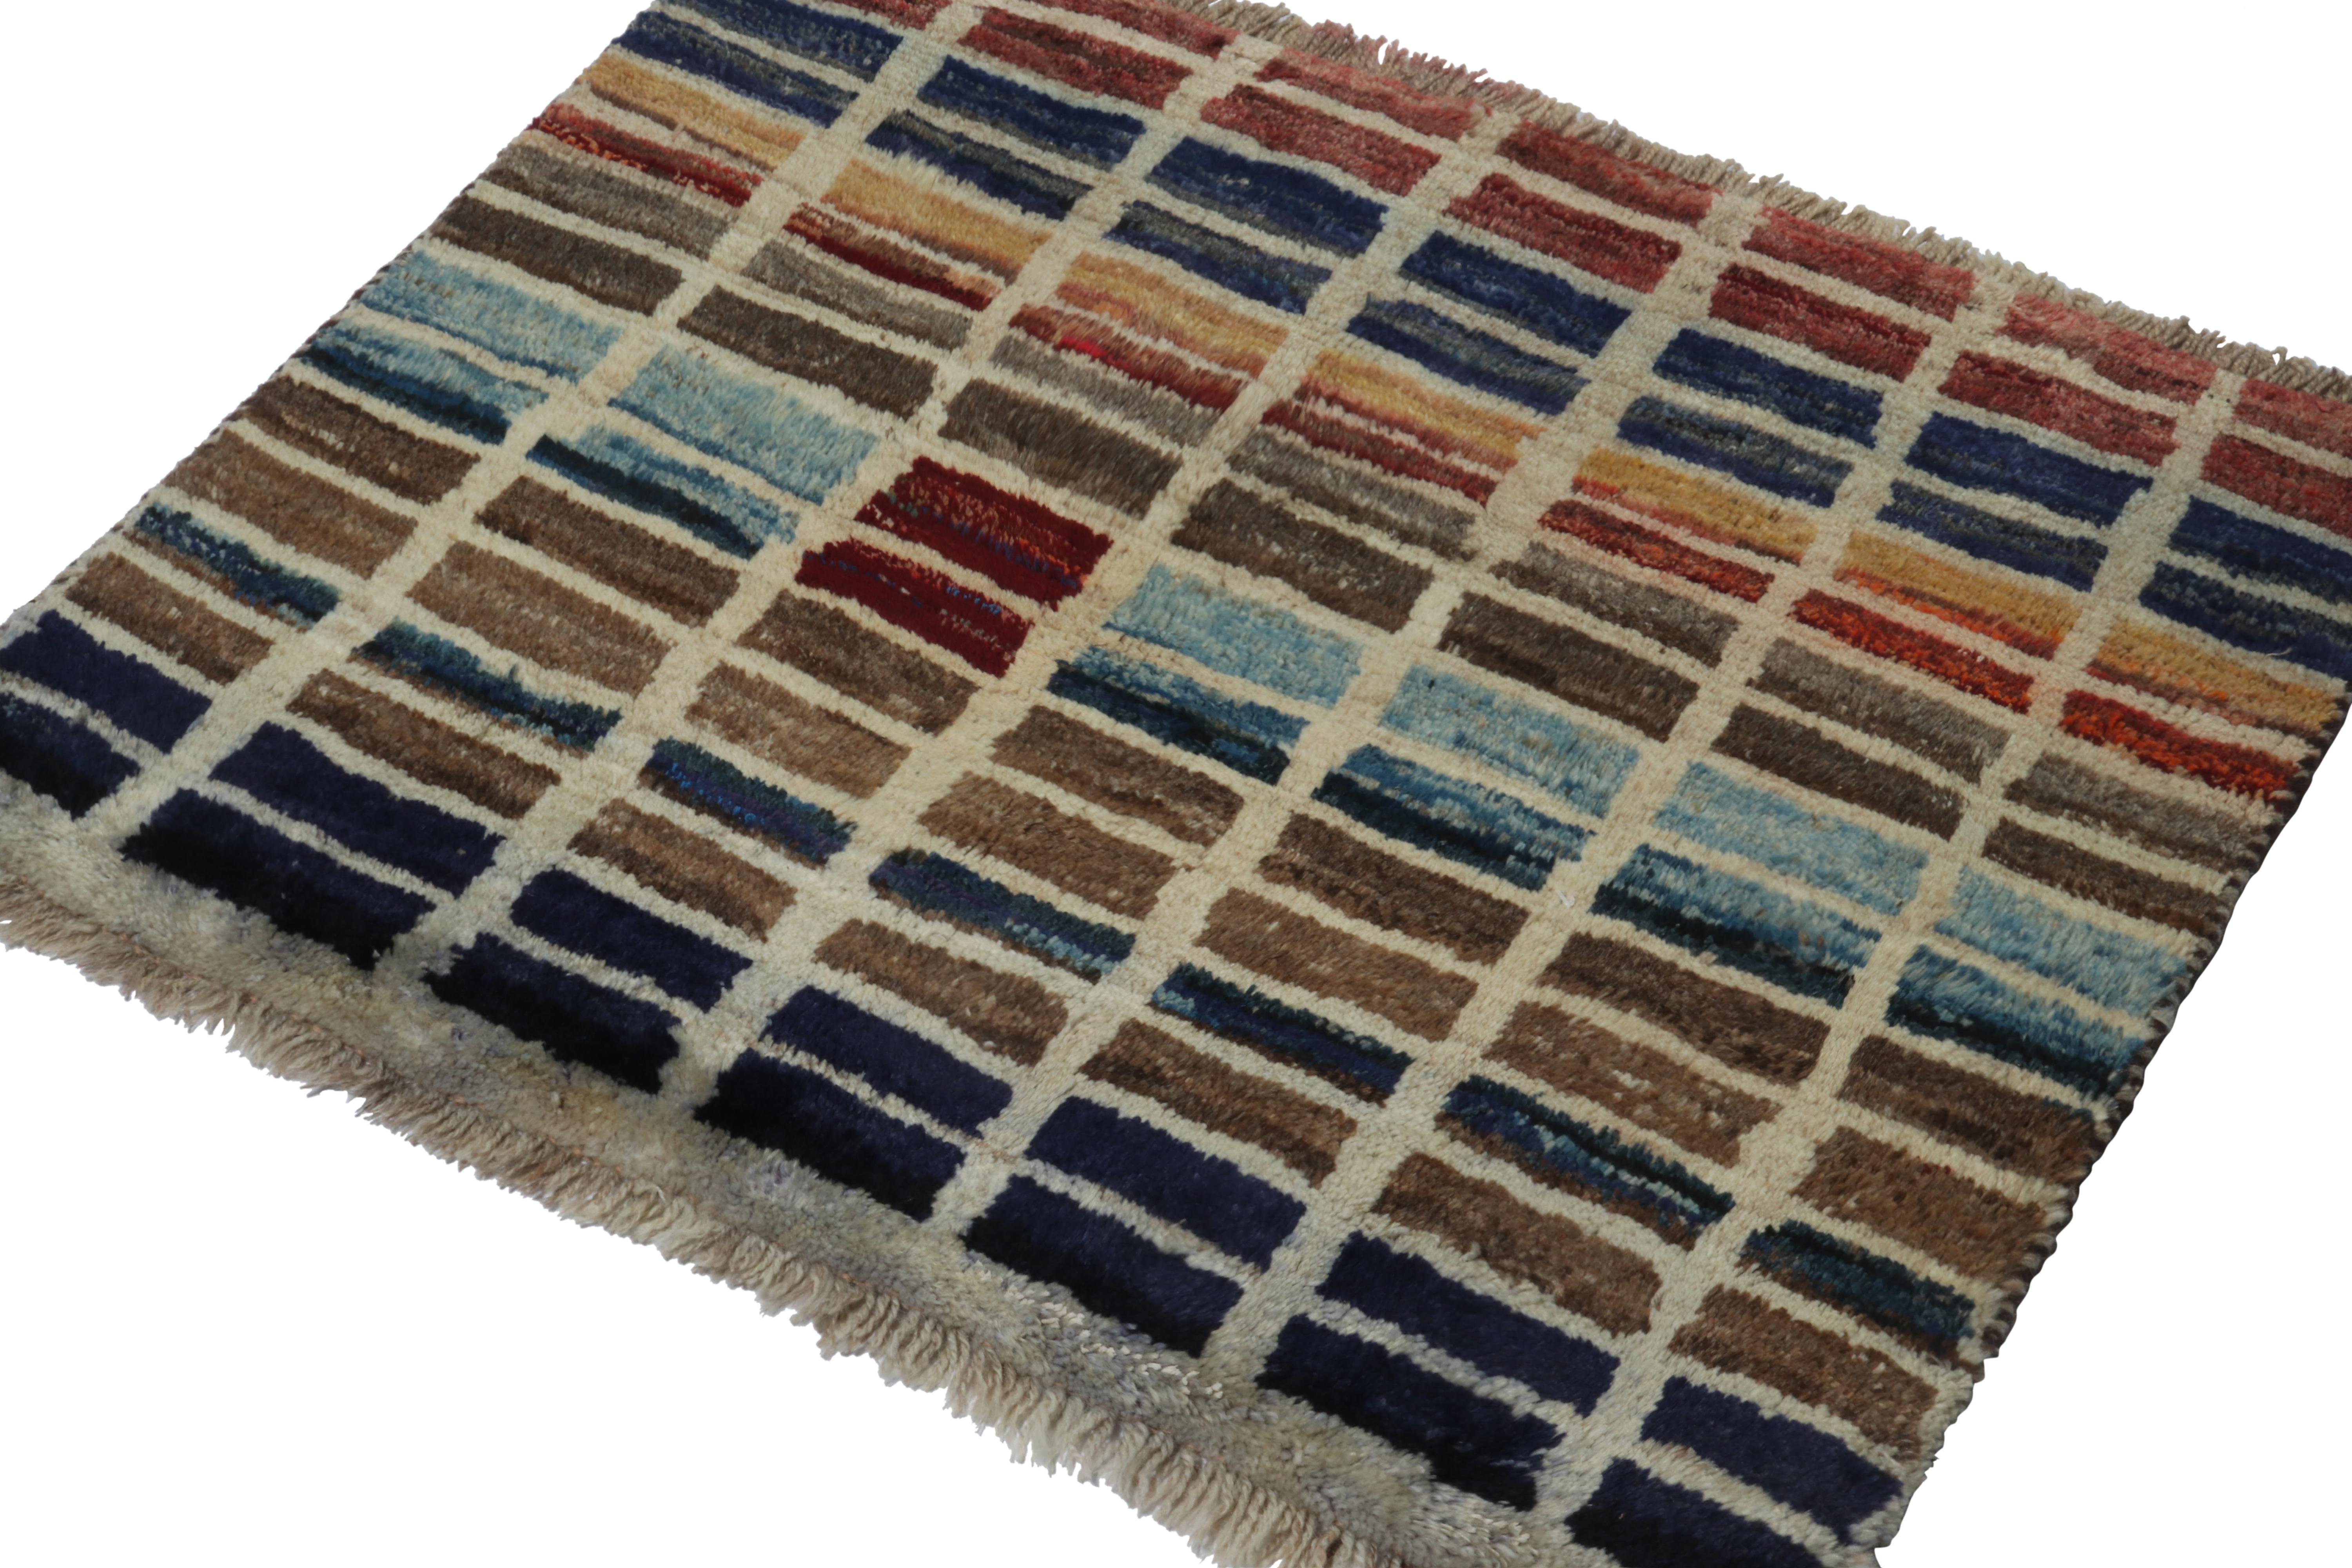 A vintage 3x3 Persian Gabbeh rug in the newest grand entry to Rug & Kilim’s curation of rare tribal pieces. Hand-knotted in wool circa 1950-1960.

On the Design:

This piece enjoys a grid-like geometric pattern, with playful tones of blue, and